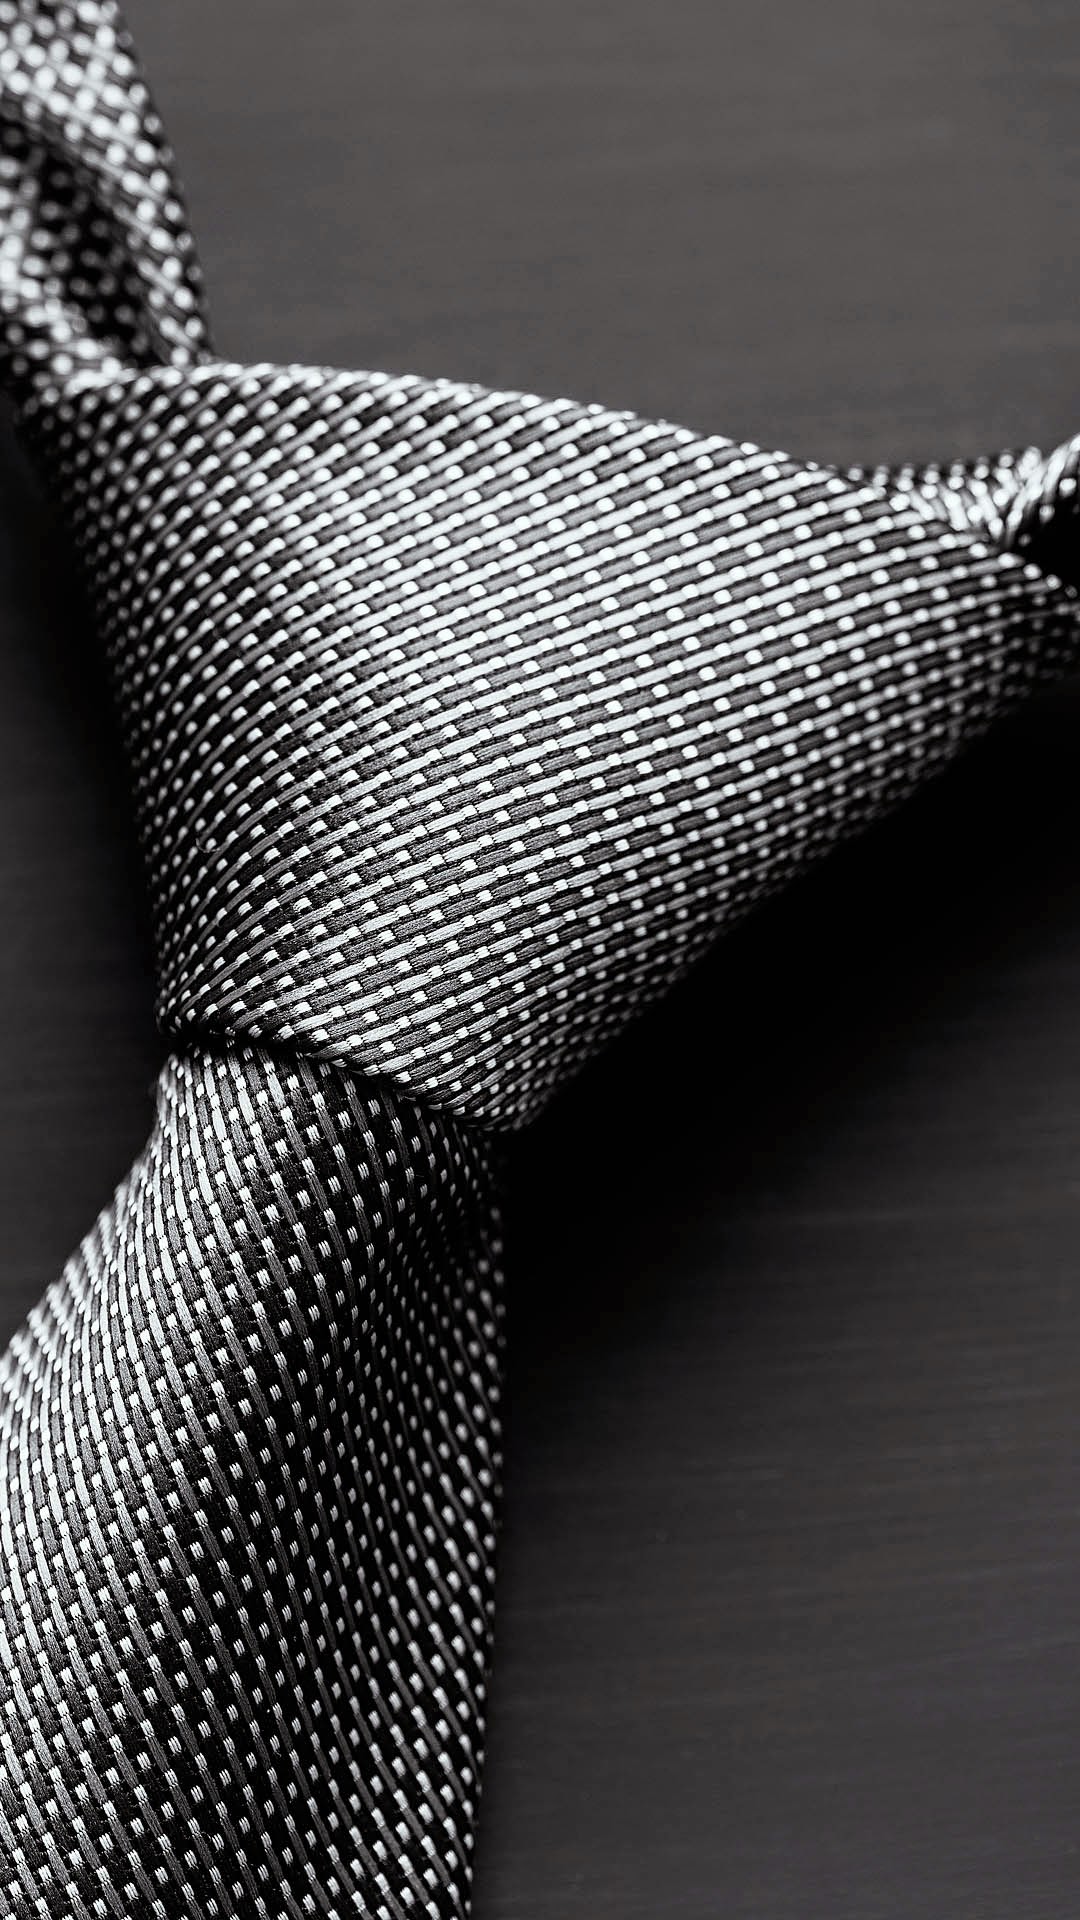 10 Fifty Shades of Grey HD Wallpapers and Backgrounds